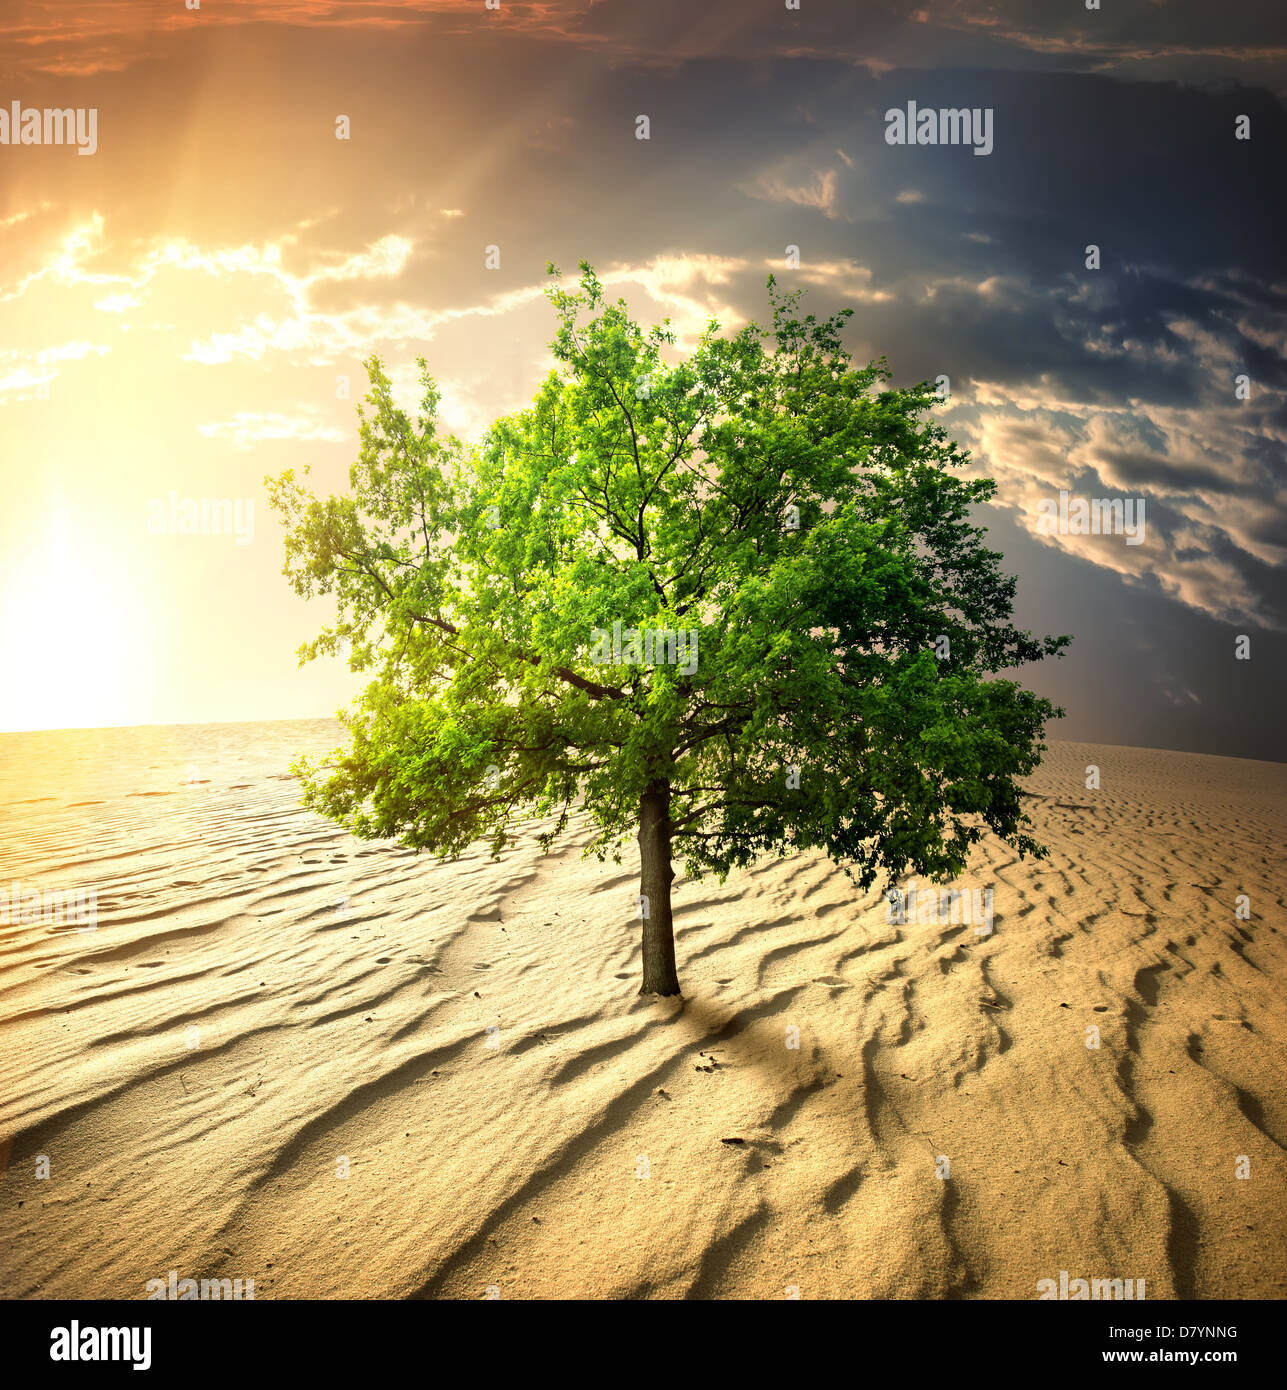 Green tree in the desert at sunset Stock Photo